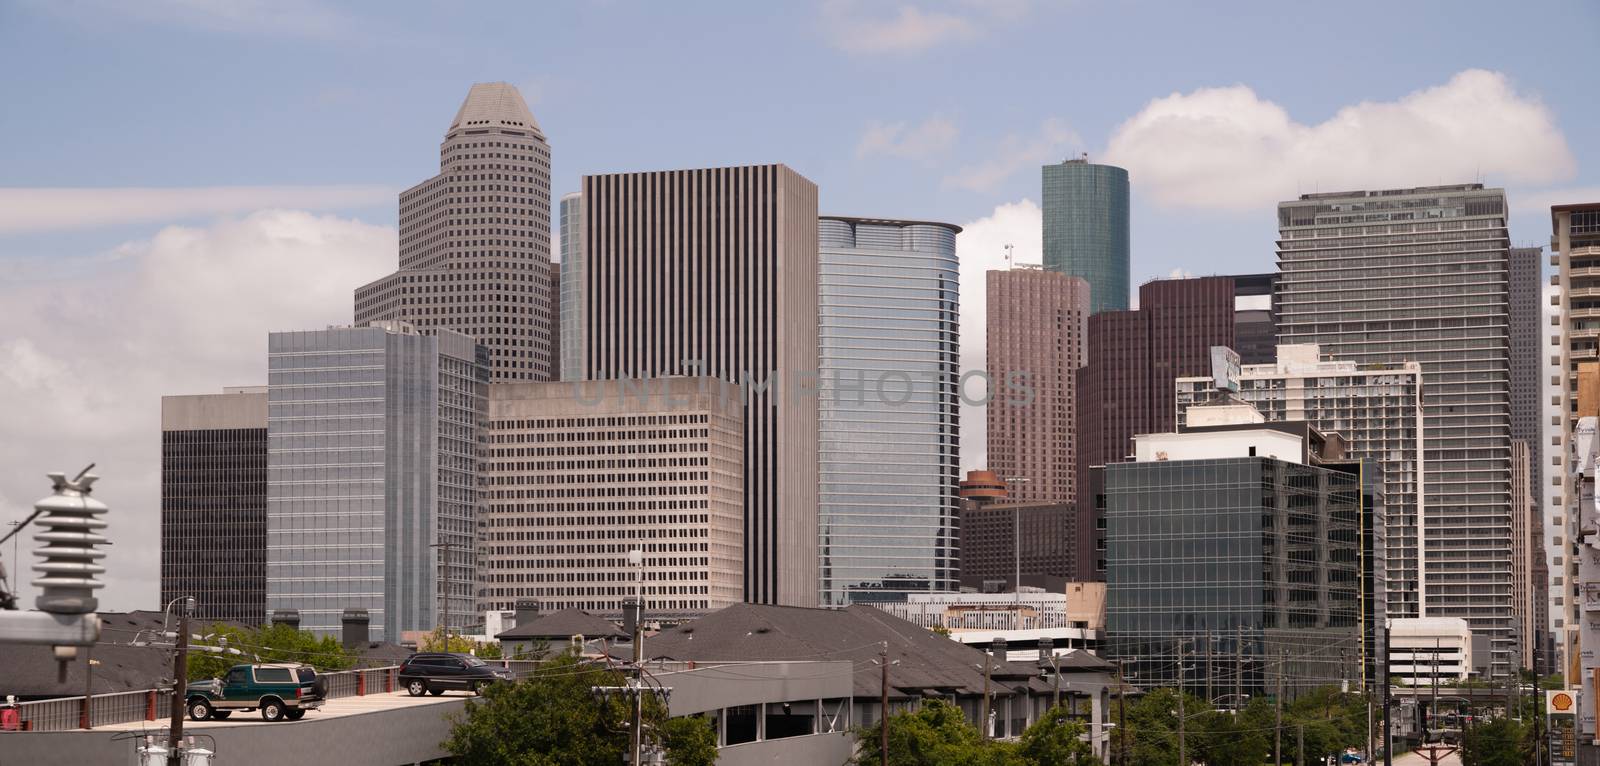 Houston Texas City Skyline South Side Downtown by ChrisBoswell